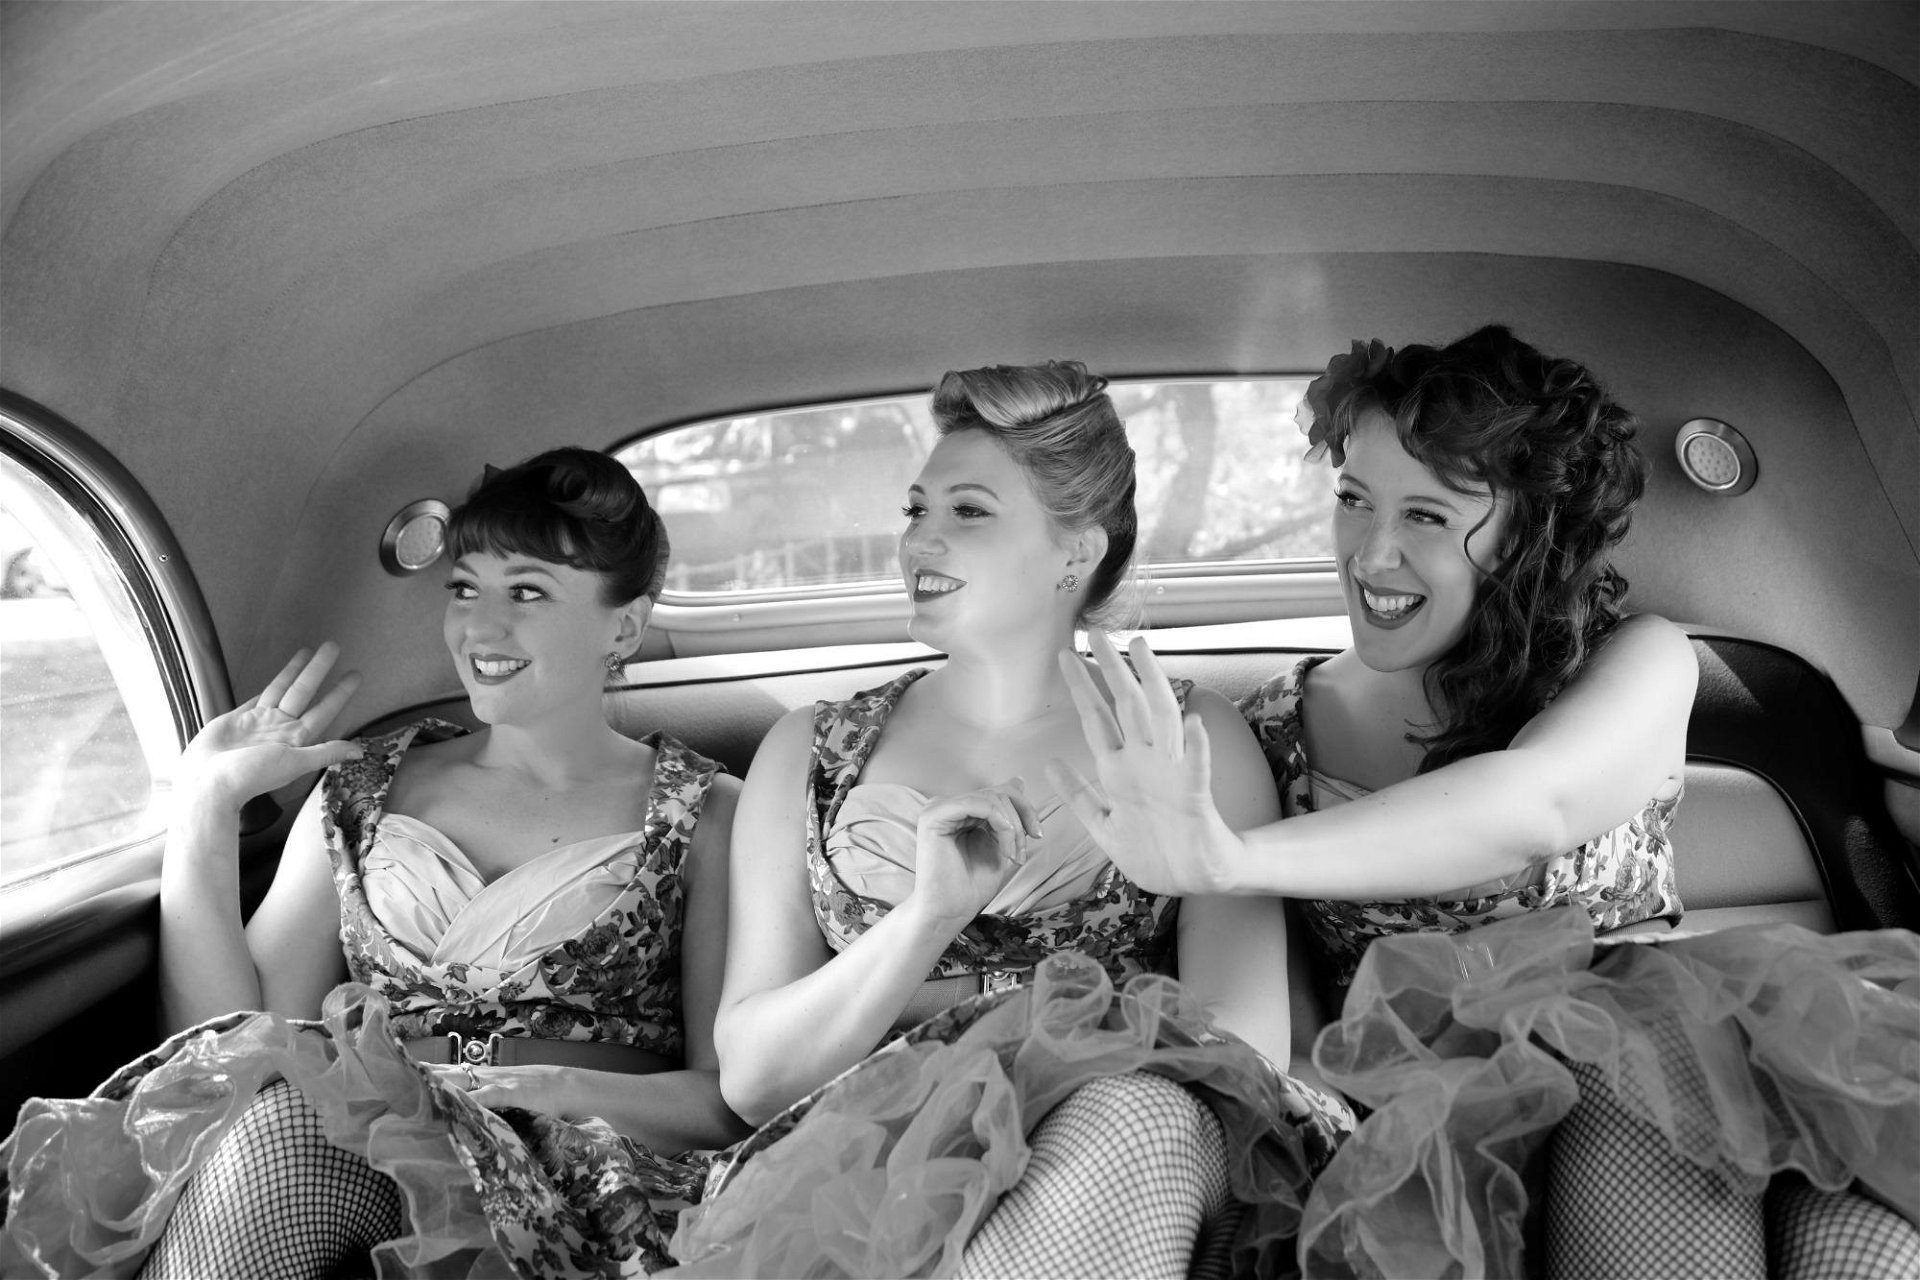 Promo S.O.S (Sirens of Swing) Vintage Vocal Trio Essex